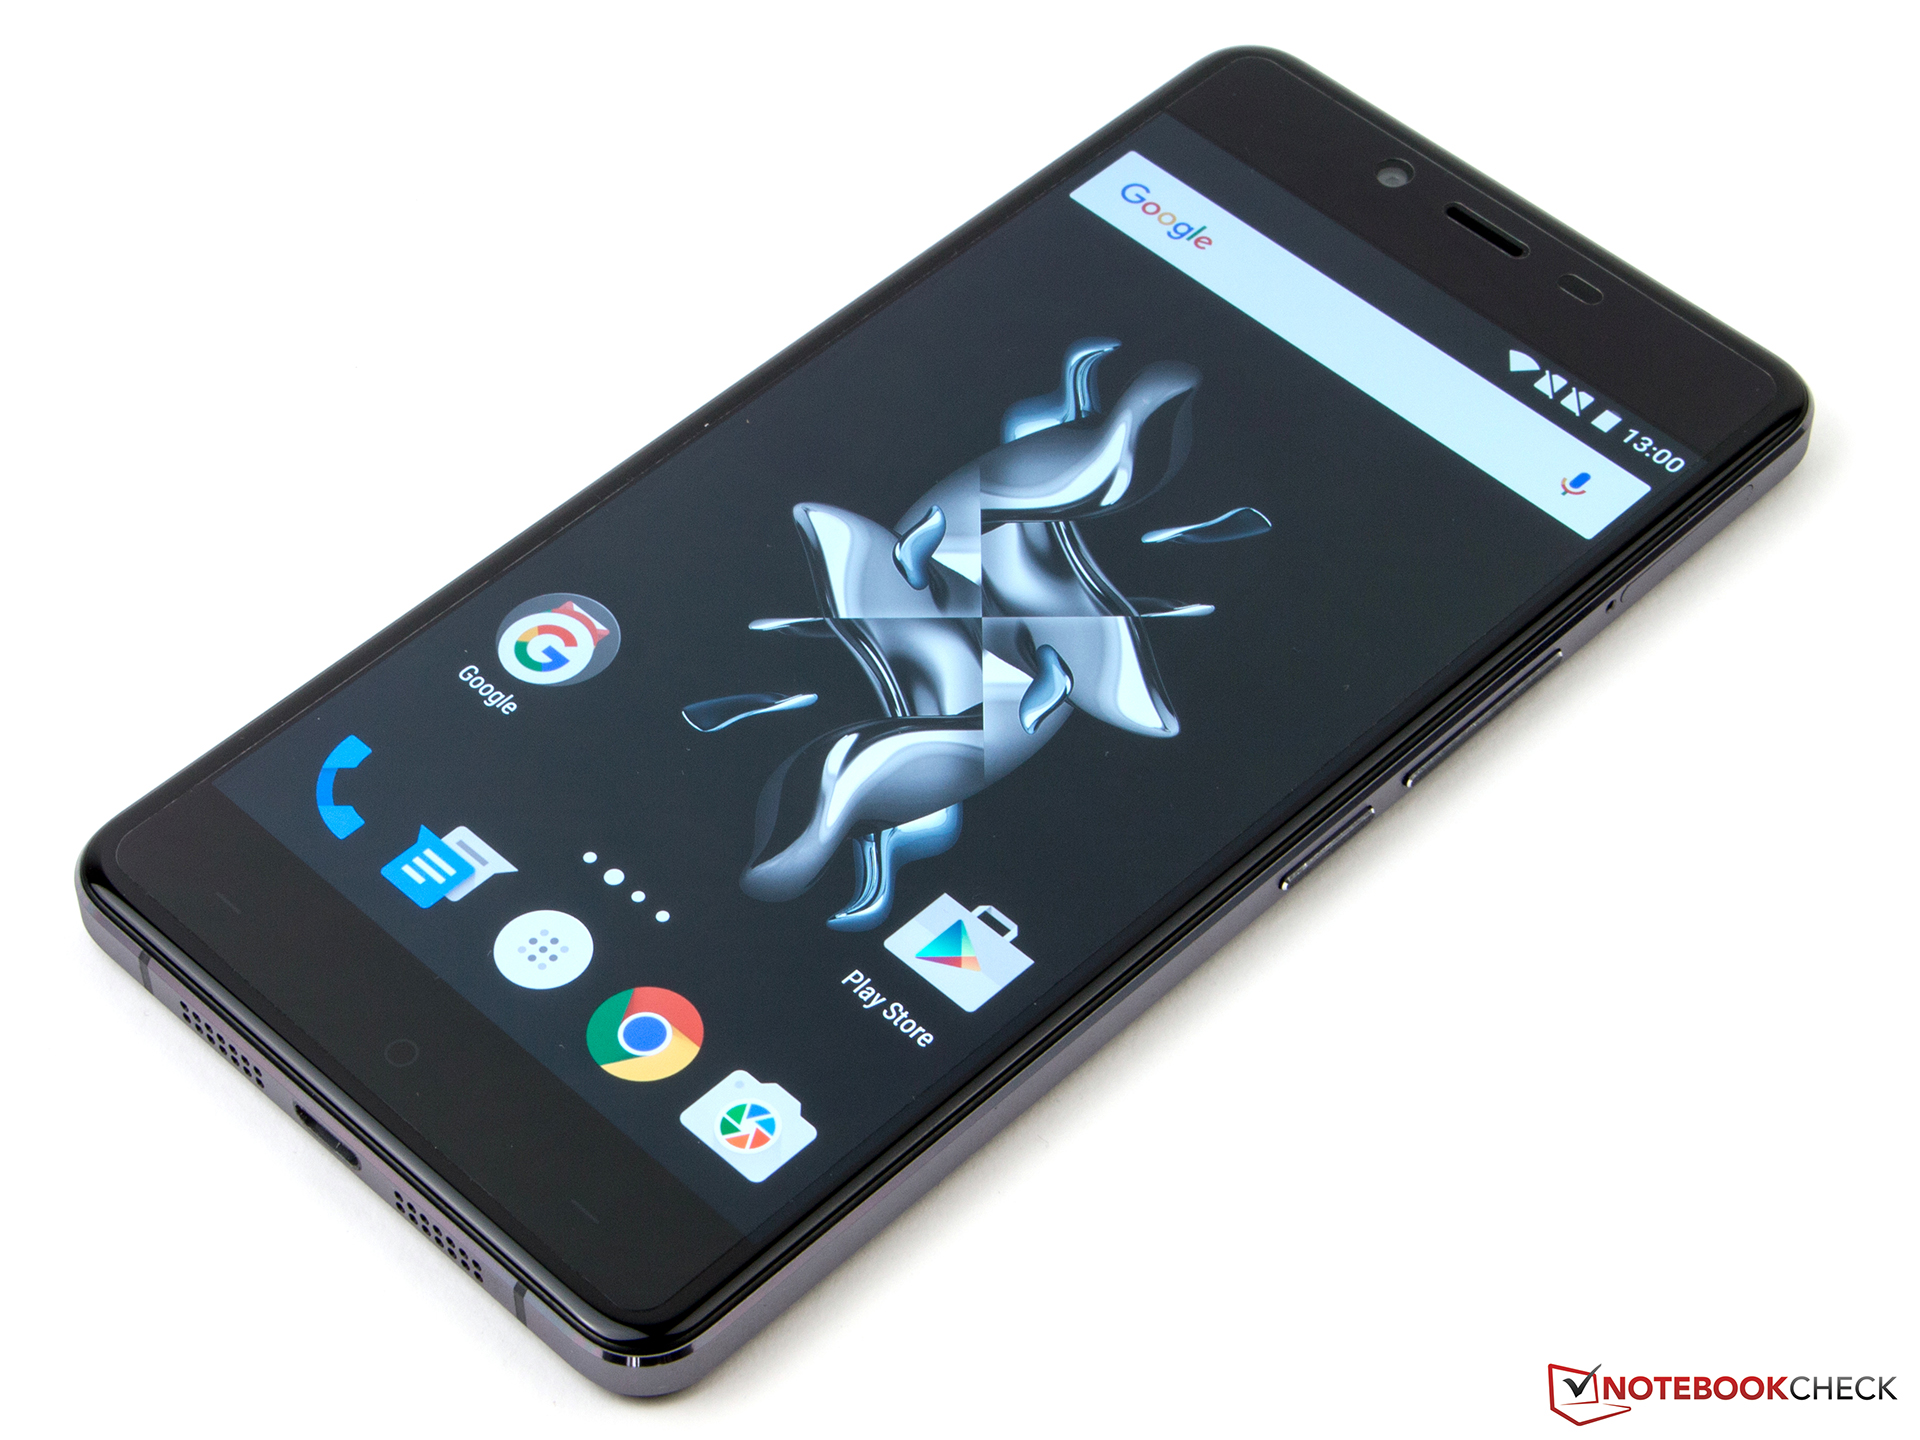 Oneplus x live chat